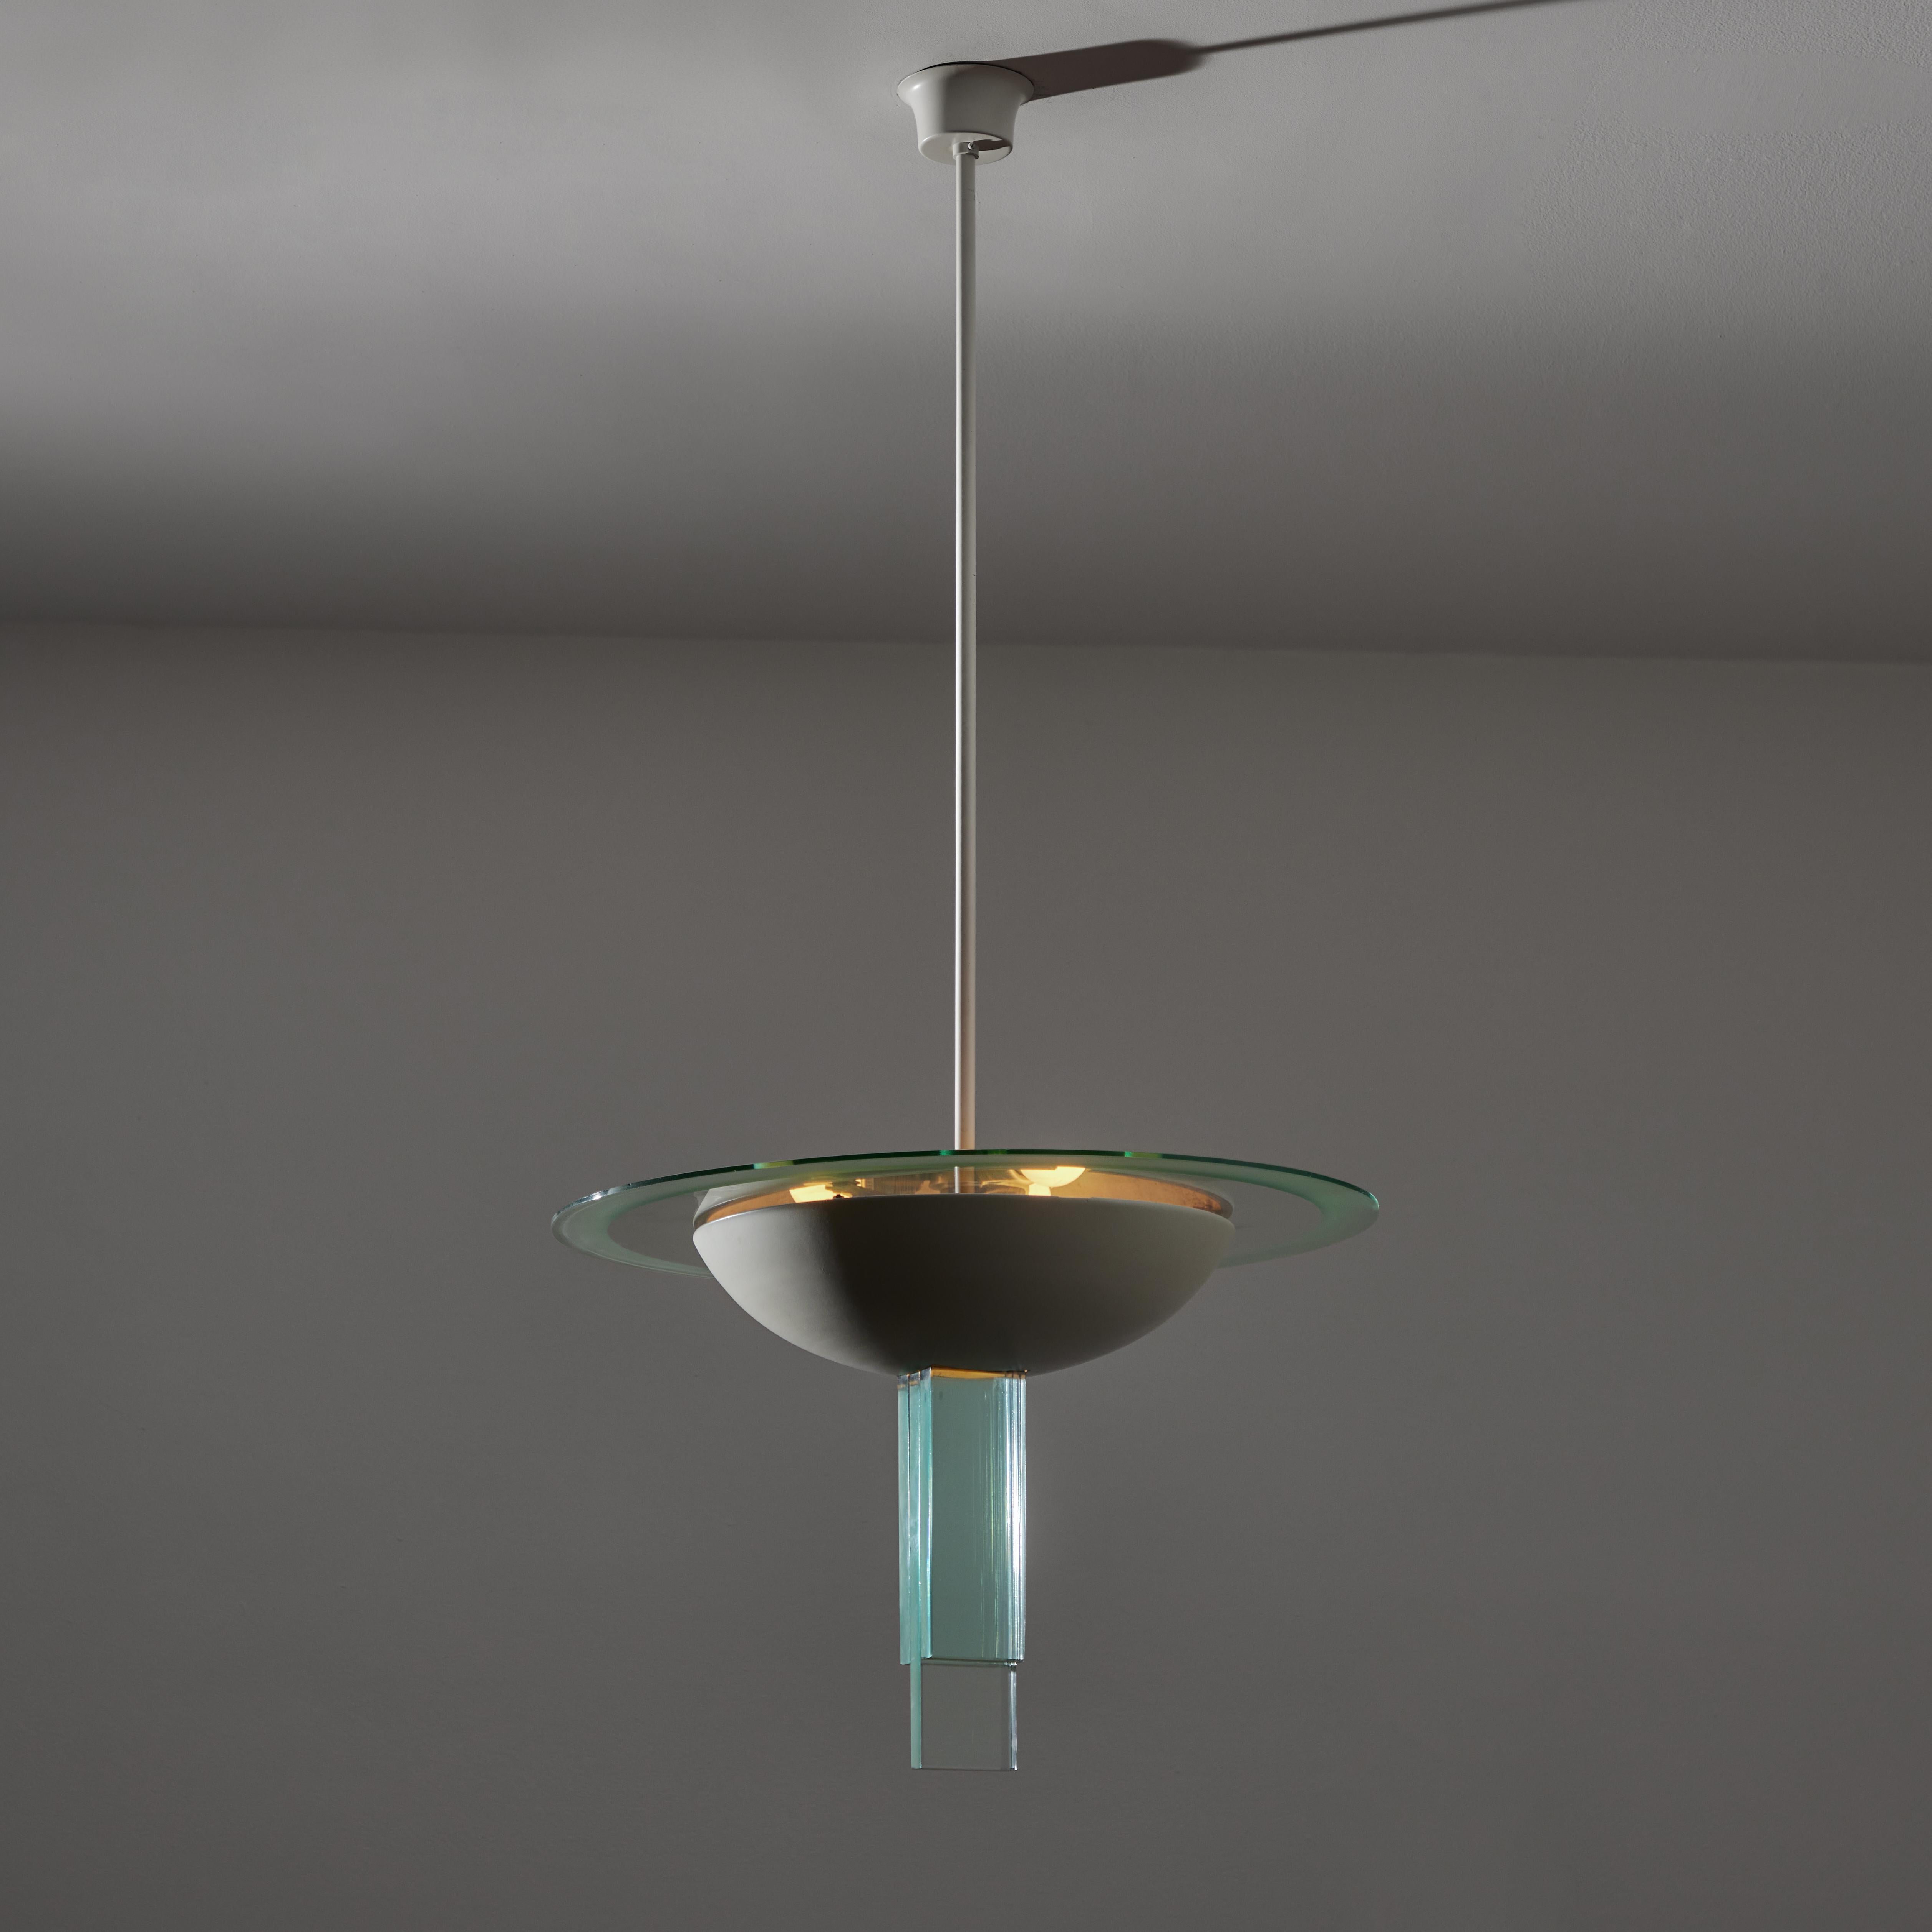 Ceiling Light by Pietro Chiesa for Fontana Arte. Designed and manufactured in Italy circa the 1950s. A timeless and sculptural ceiling light with signature Fontana Arte glass detailing and enameled brass dome shade. This piece holds three E27 bulbs,